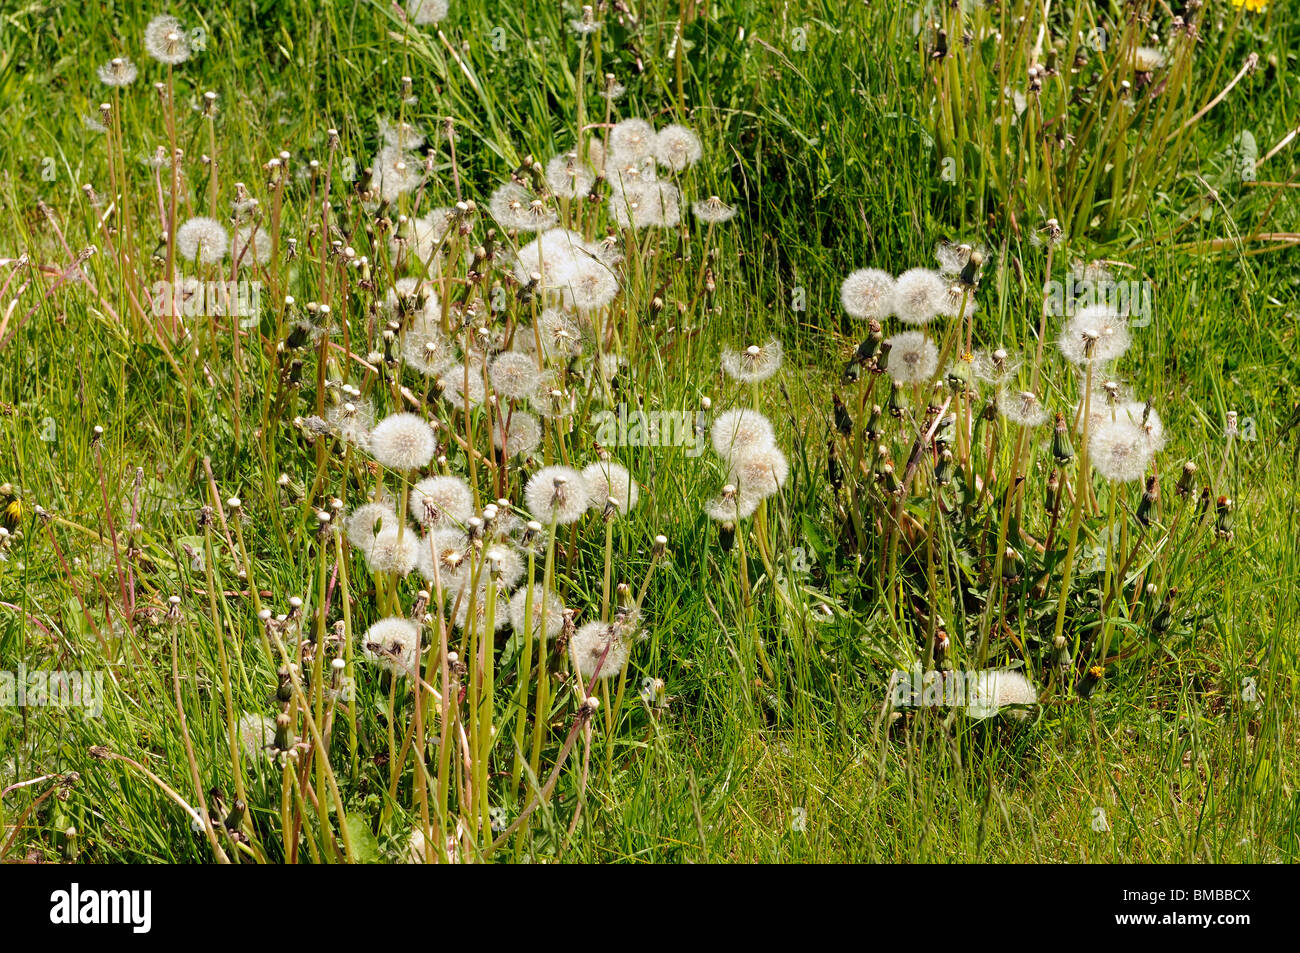 Dandelion plants and seed pods grow in a grass field Stock Photo